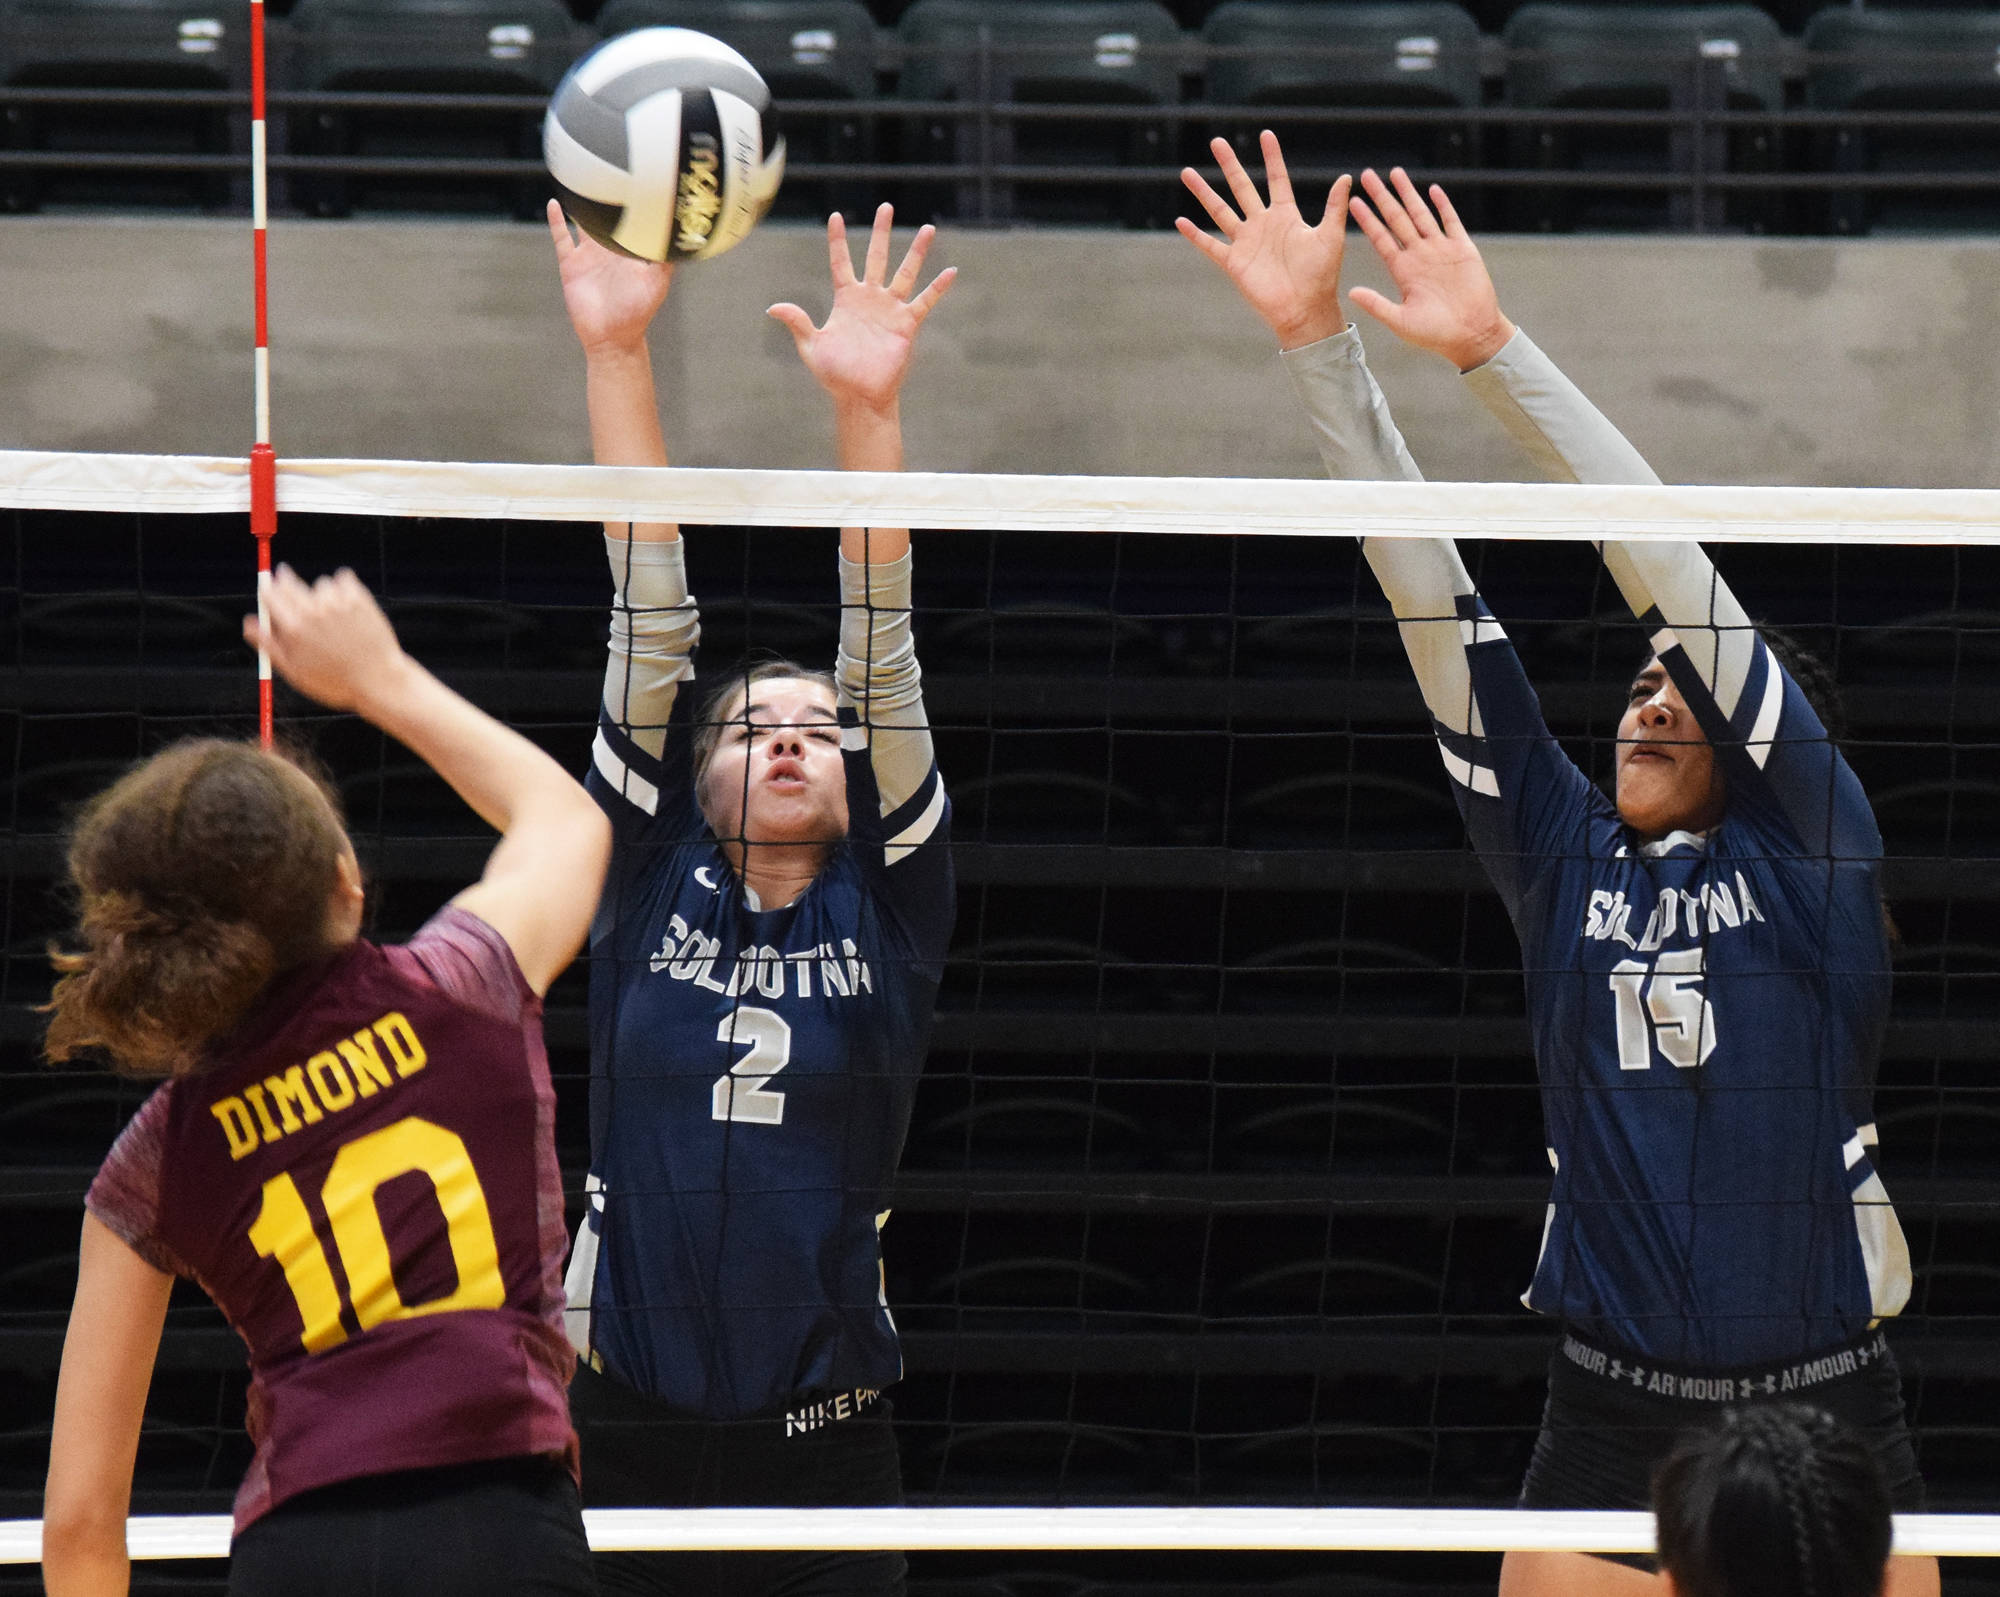 Soldotna’s Sierra Kuntz (2) and Serenia Foglia team up for a block on Dimond’s Taliyah Esters, Thursday, Nov. 14, 2019, at the Class 4A state volleyball tournament at the Alaska Airlines Center in Anchorage, Alaska. (Photo by Joey Klecka/Peninsula Clarion)